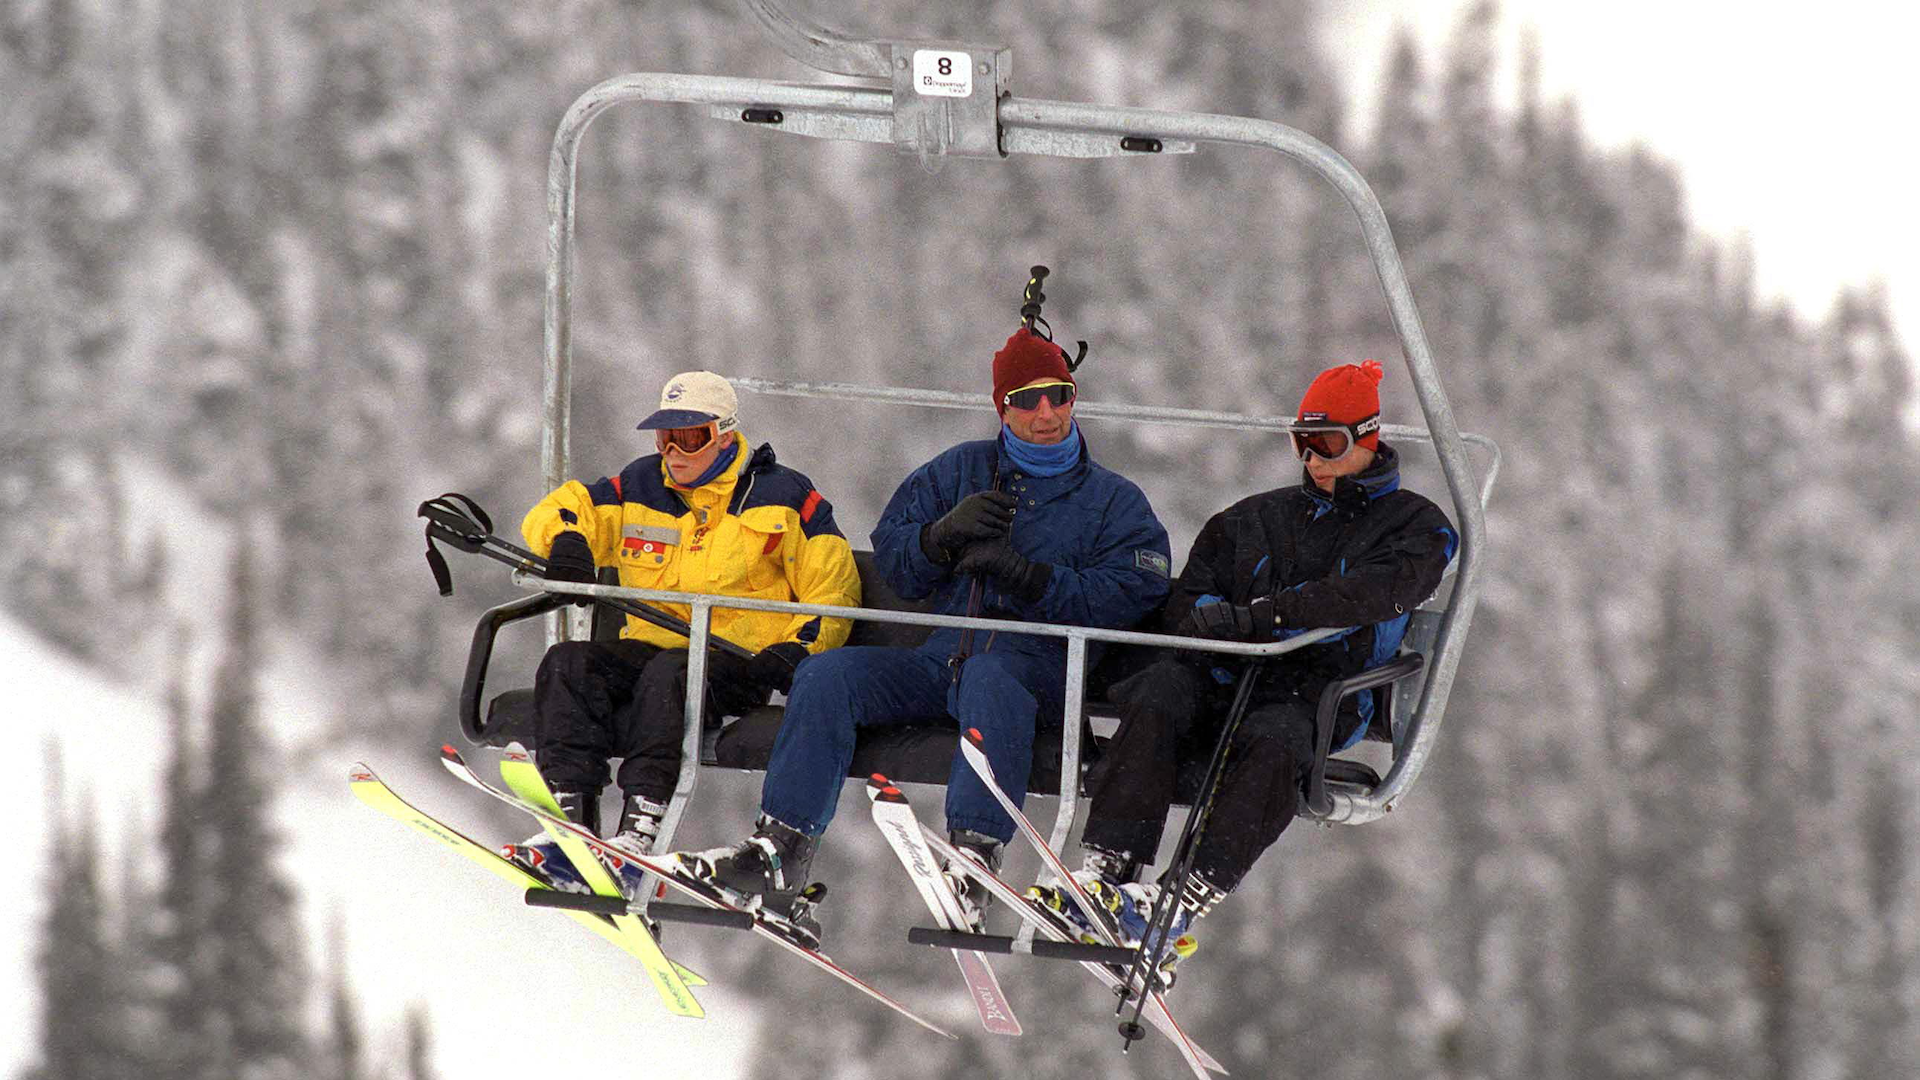 <p>                     The royals often try to squeeze in some downtime between duties on official trips. Prince Charles took time out for some skiing with his teenage sons in Whistler, British Colombia during a visit to Canada in 1998. The family time was even more important given it was less than a year since their mother Princess Diana had died.                   </p>